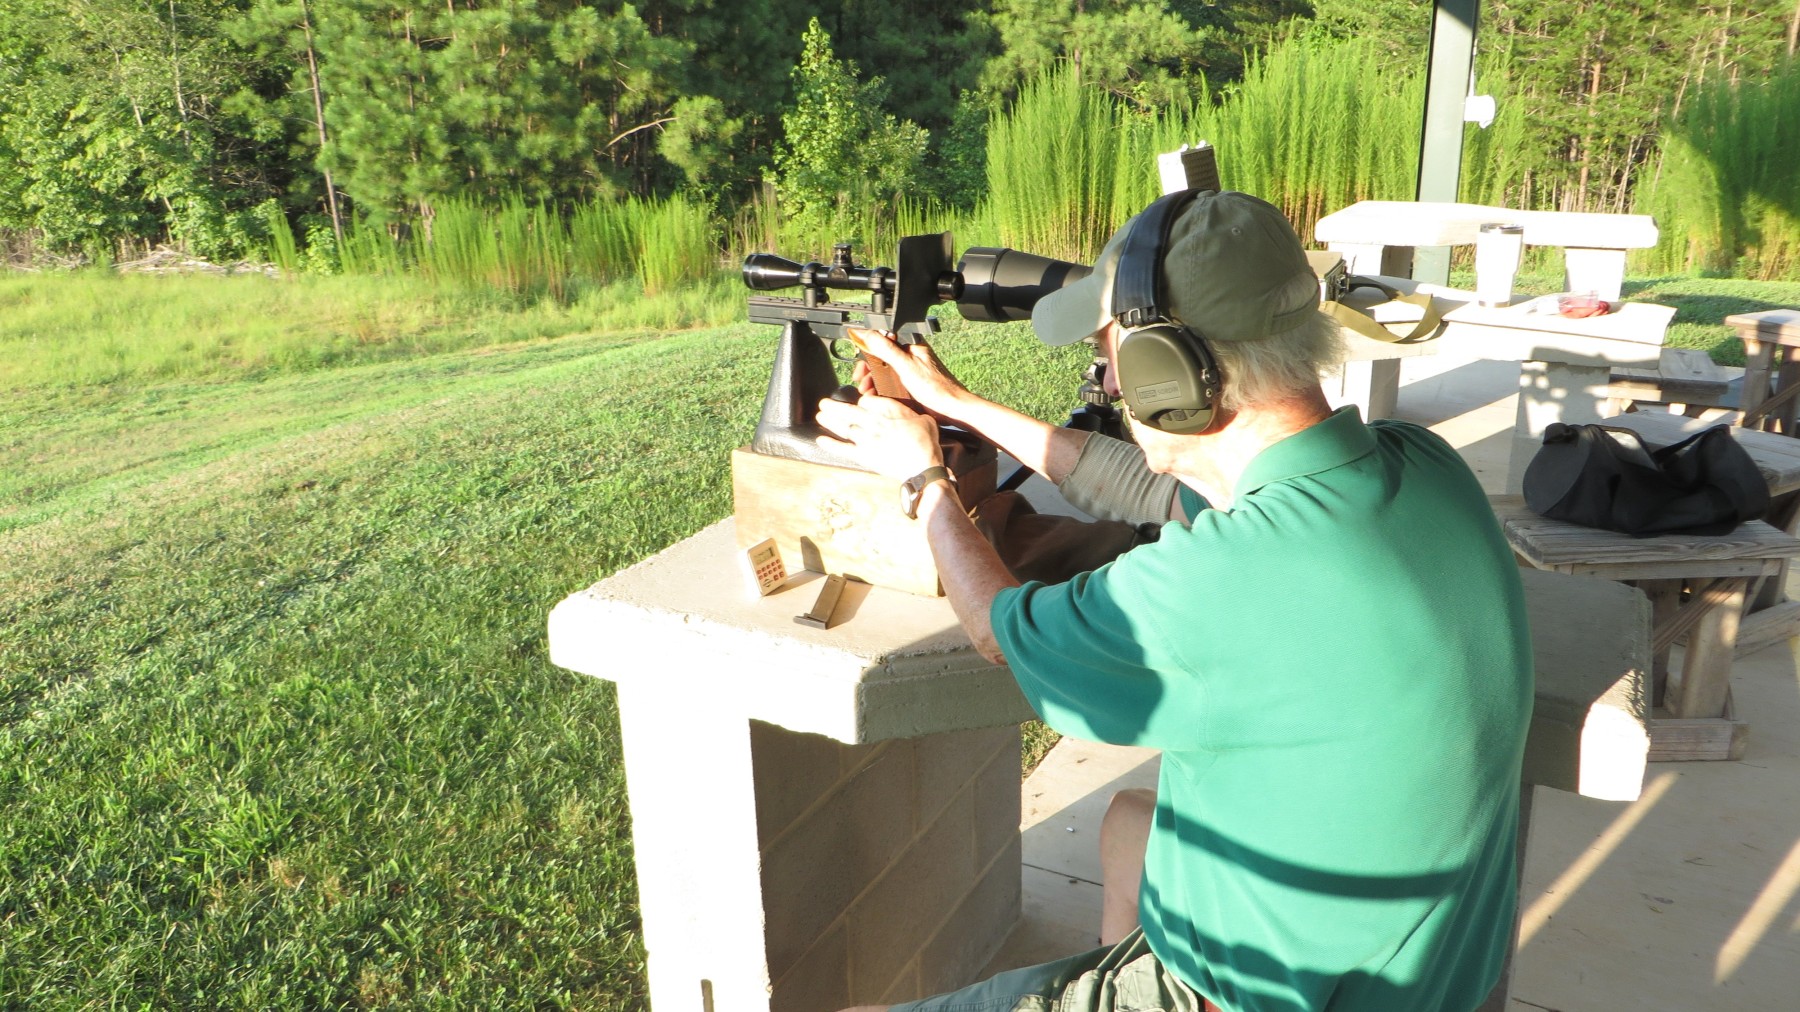 Bill McCall shows how it's done with a High Standard at 100 yards